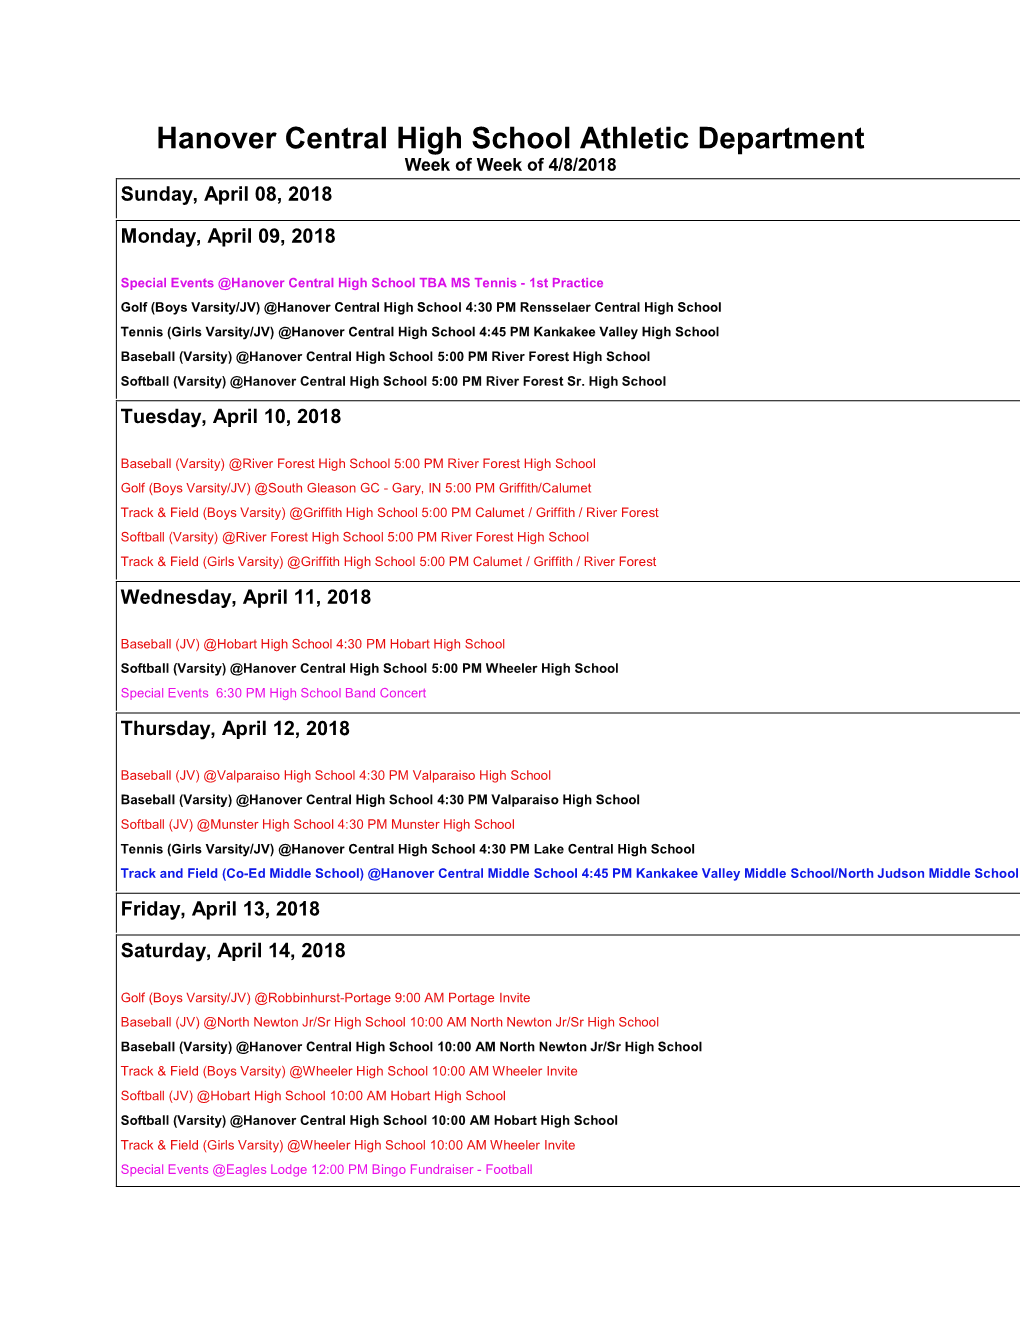 Hanover Central High School Athletic Department Week of Week of 4/8/2018 Sunday, April 08, 2018